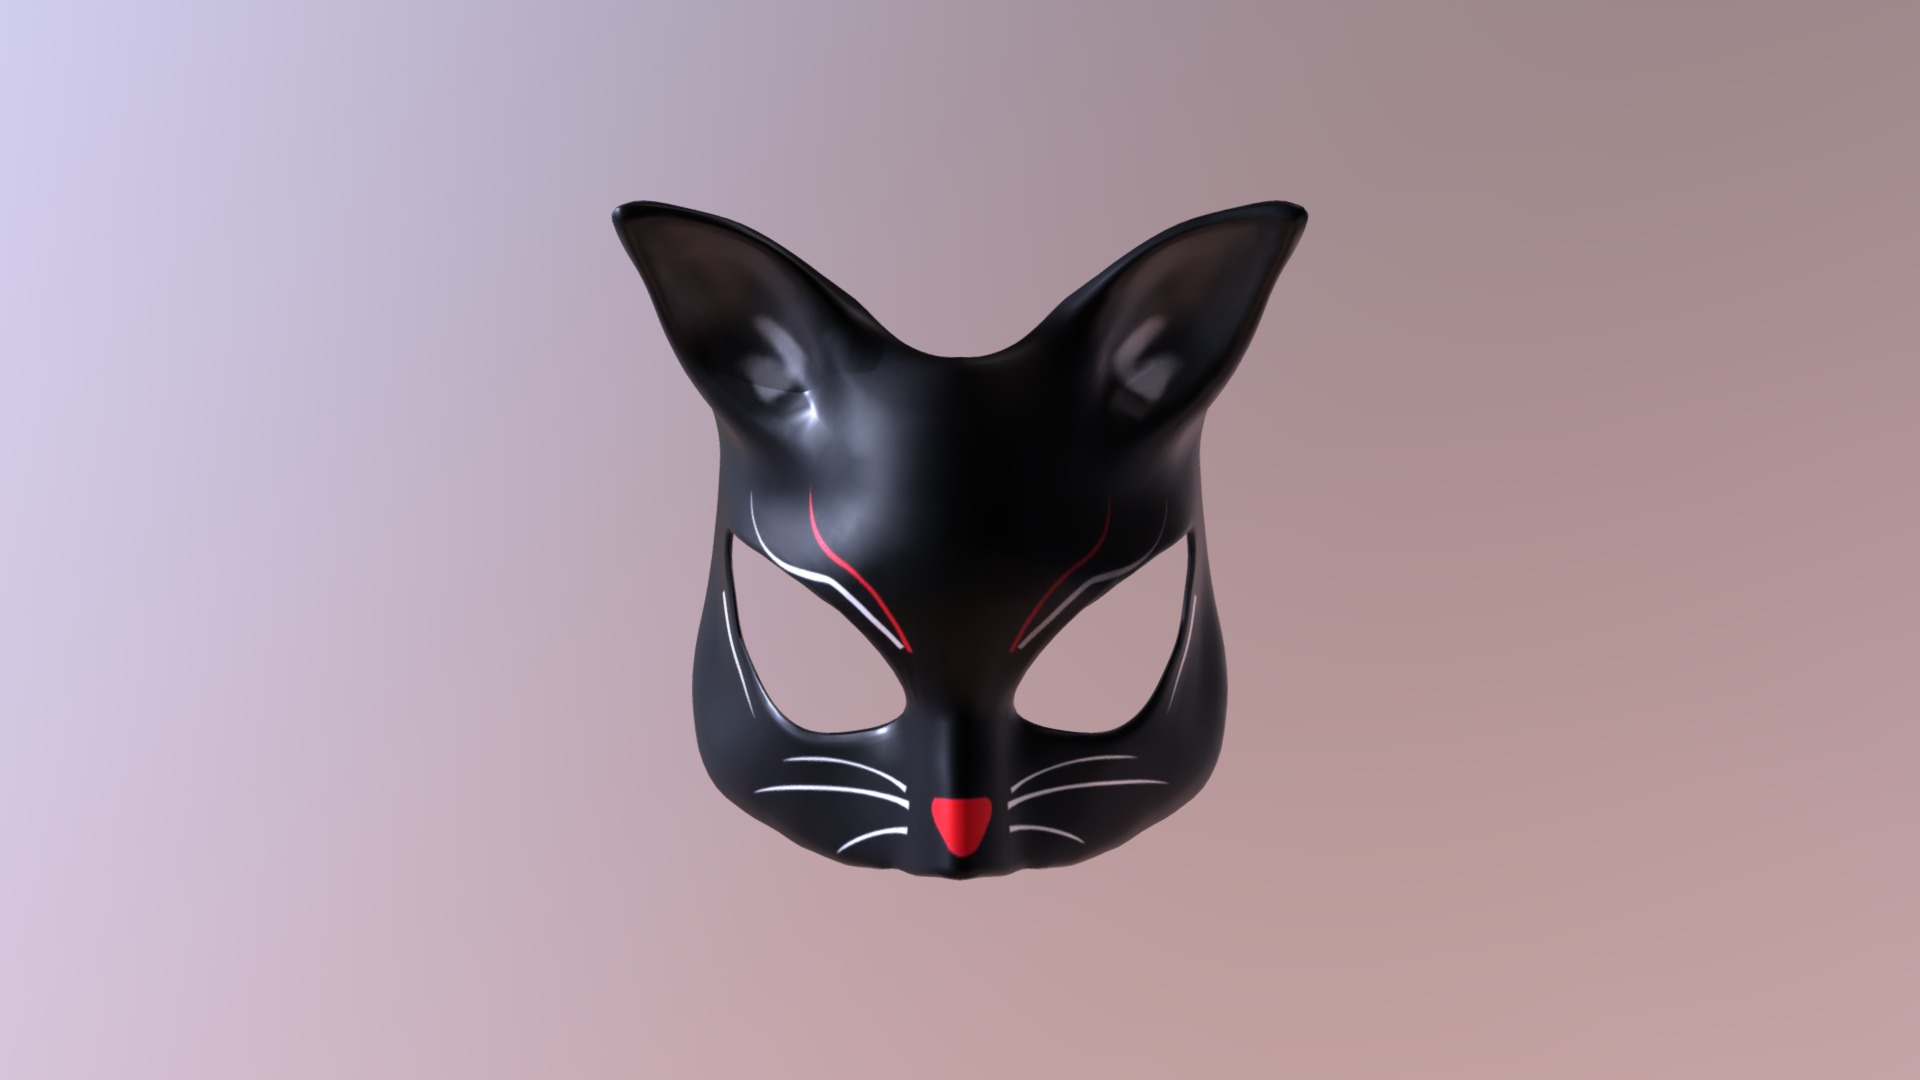 3D model Black Red Cat Mask - This is a 3D model of the Black Red Cat Mask. The 3D model is about a black and red cartoon character.